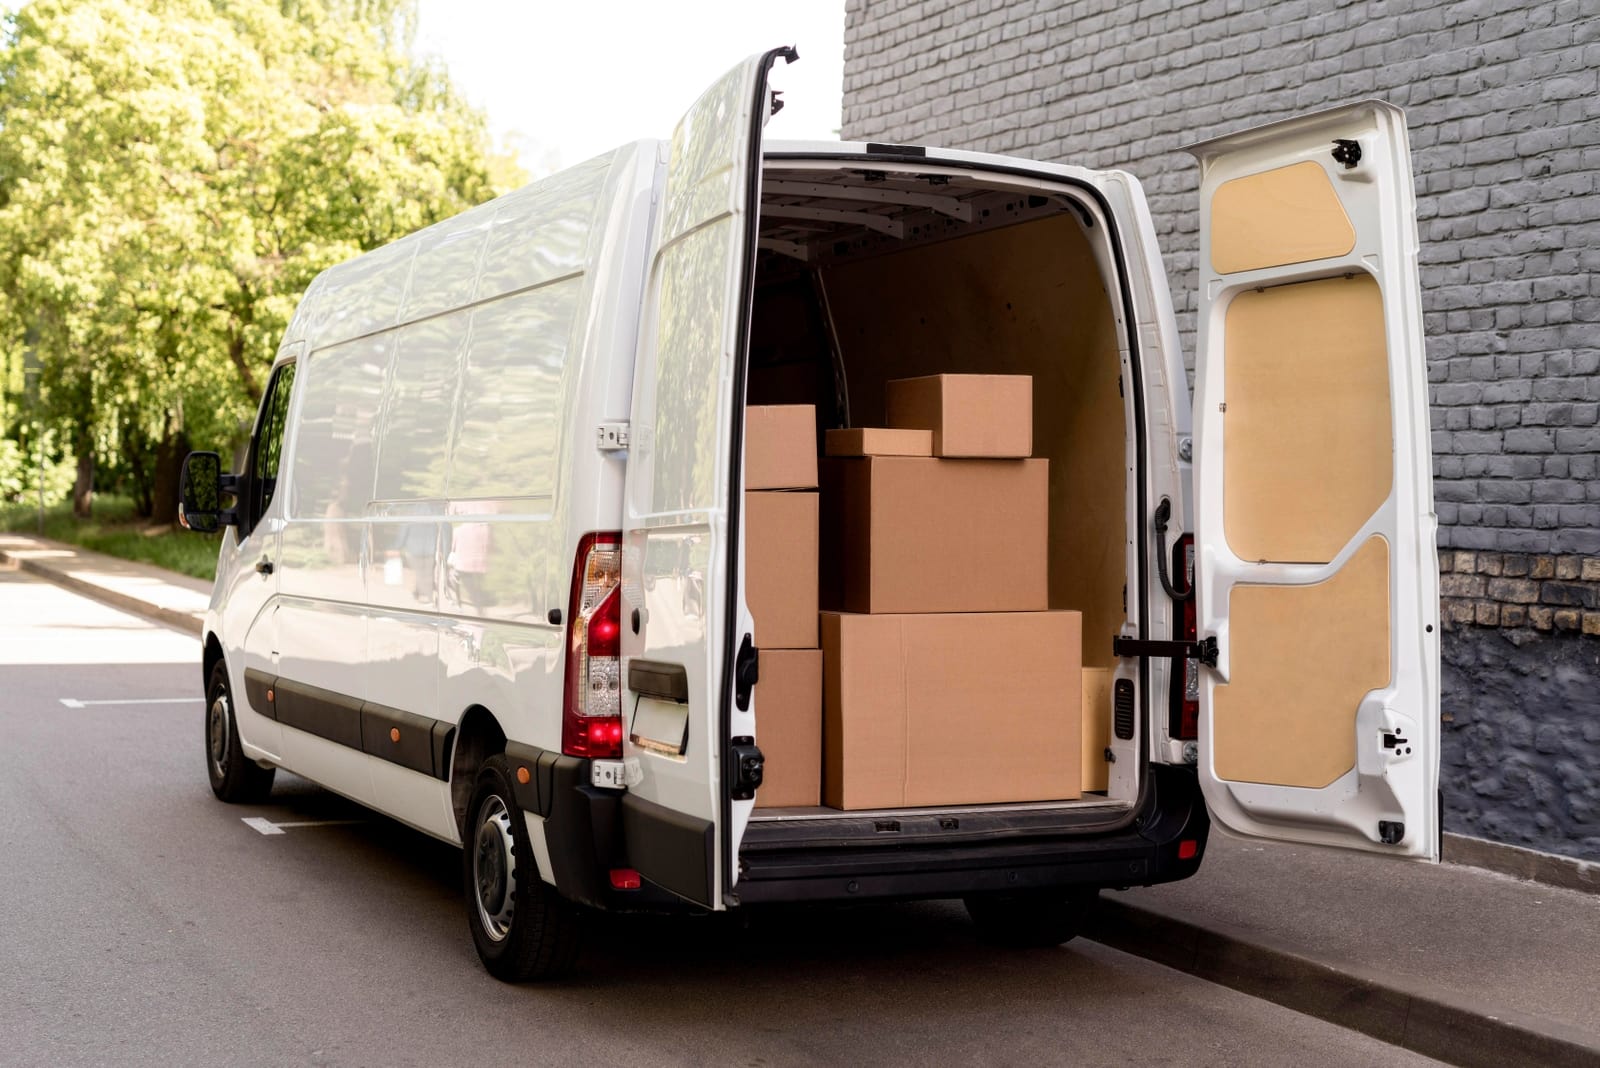 An image of a white panel van parked alongside a roadway. The rear doors of the van are open with multiple cardboard boxes stacked inside indicating that it is a delivery van.